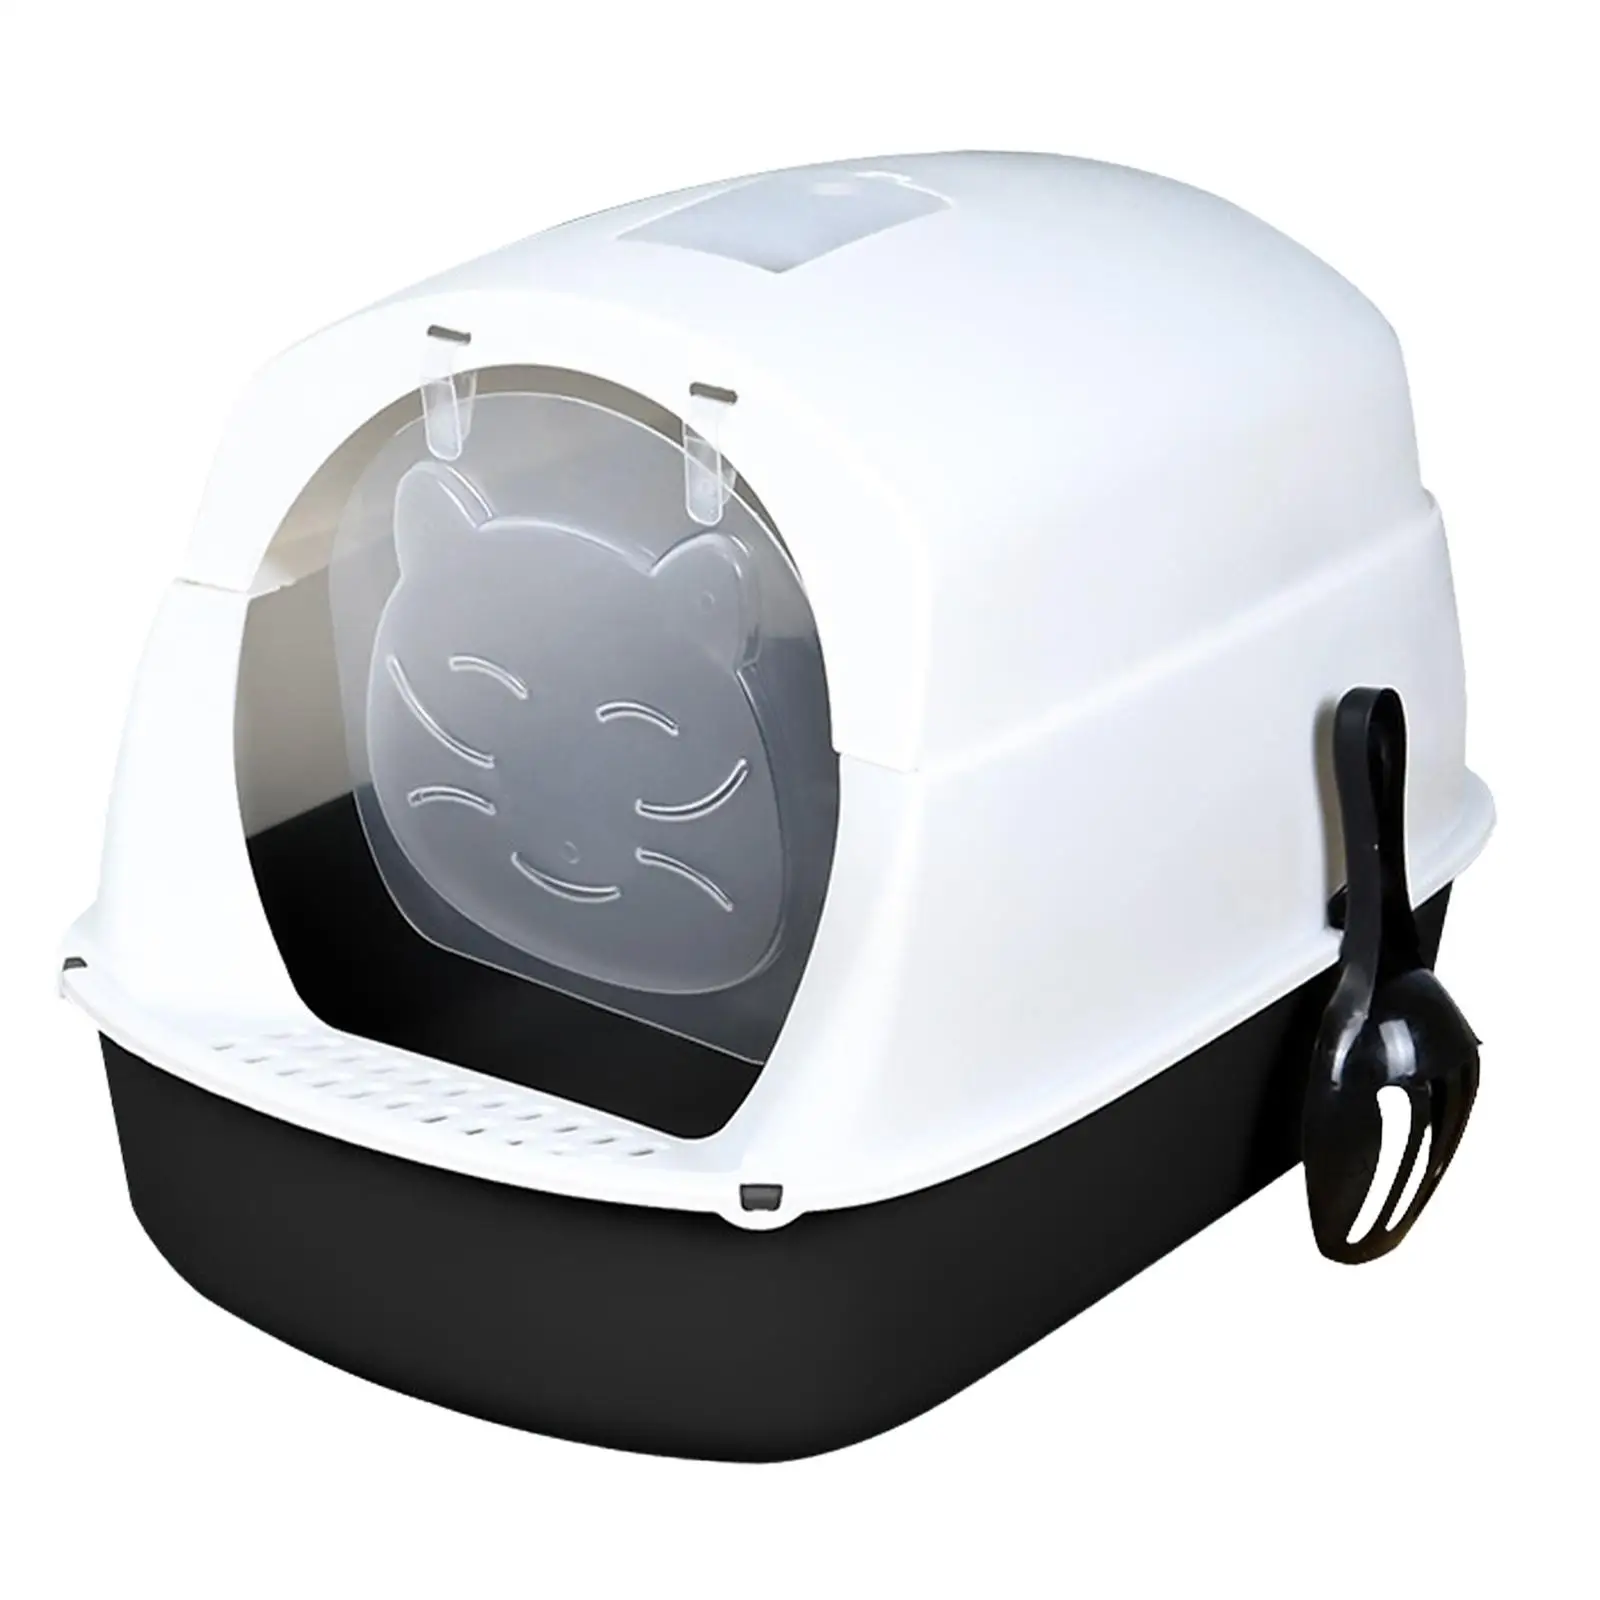 Hooded Cat Litter Box with Lid Enclosed and Covered Cat Toilet with Door Portable Cat Litter Tray Pet Litter Box Pet Accessories